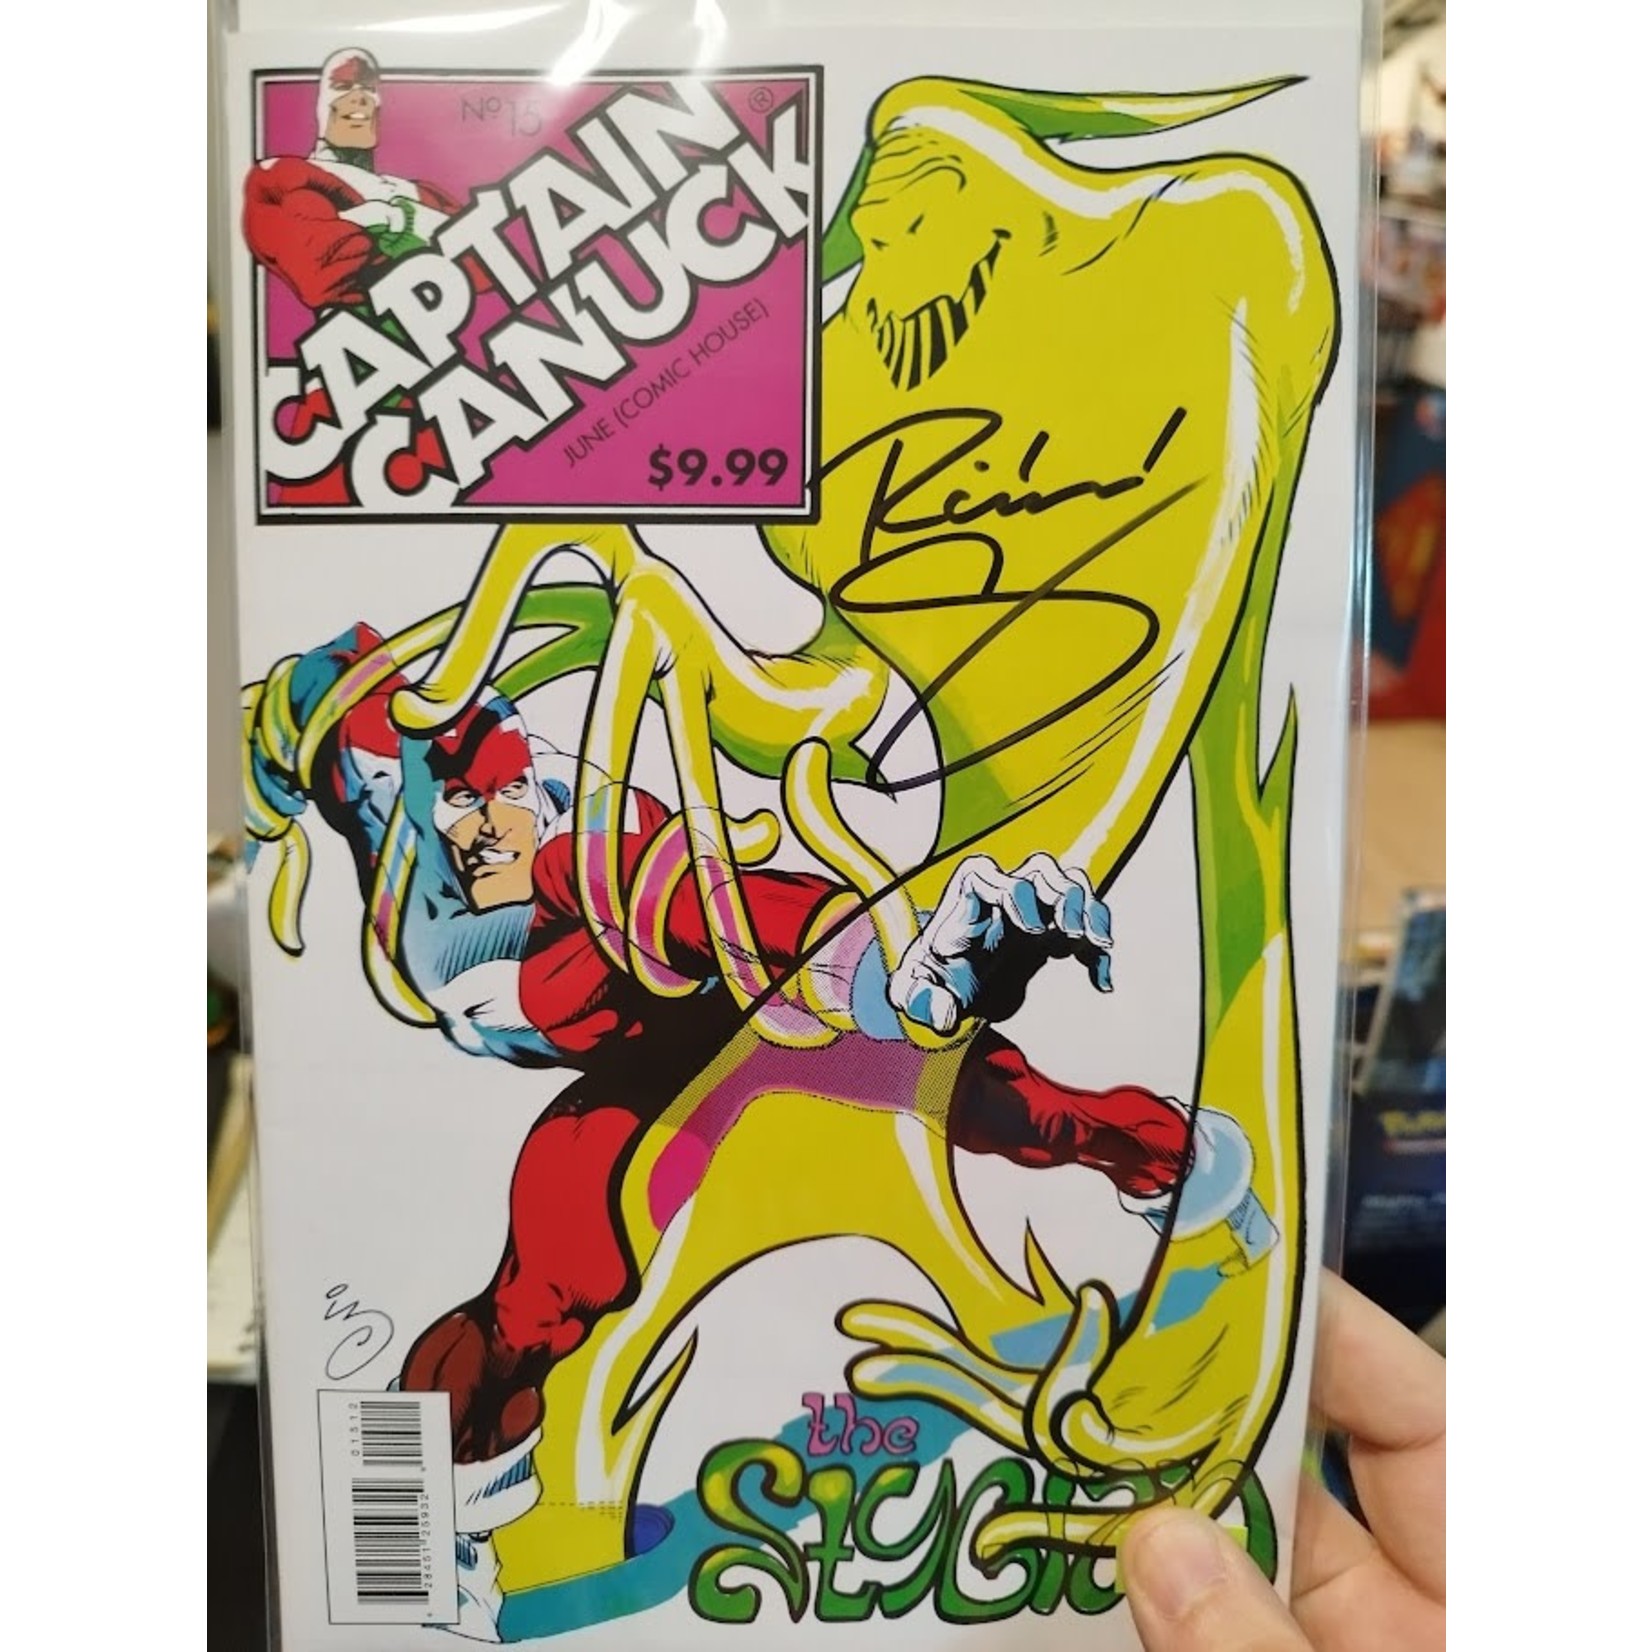 Chapterhouse CAPTAIN CANUCK #15 2ND print Signed by Creator Richard Comely